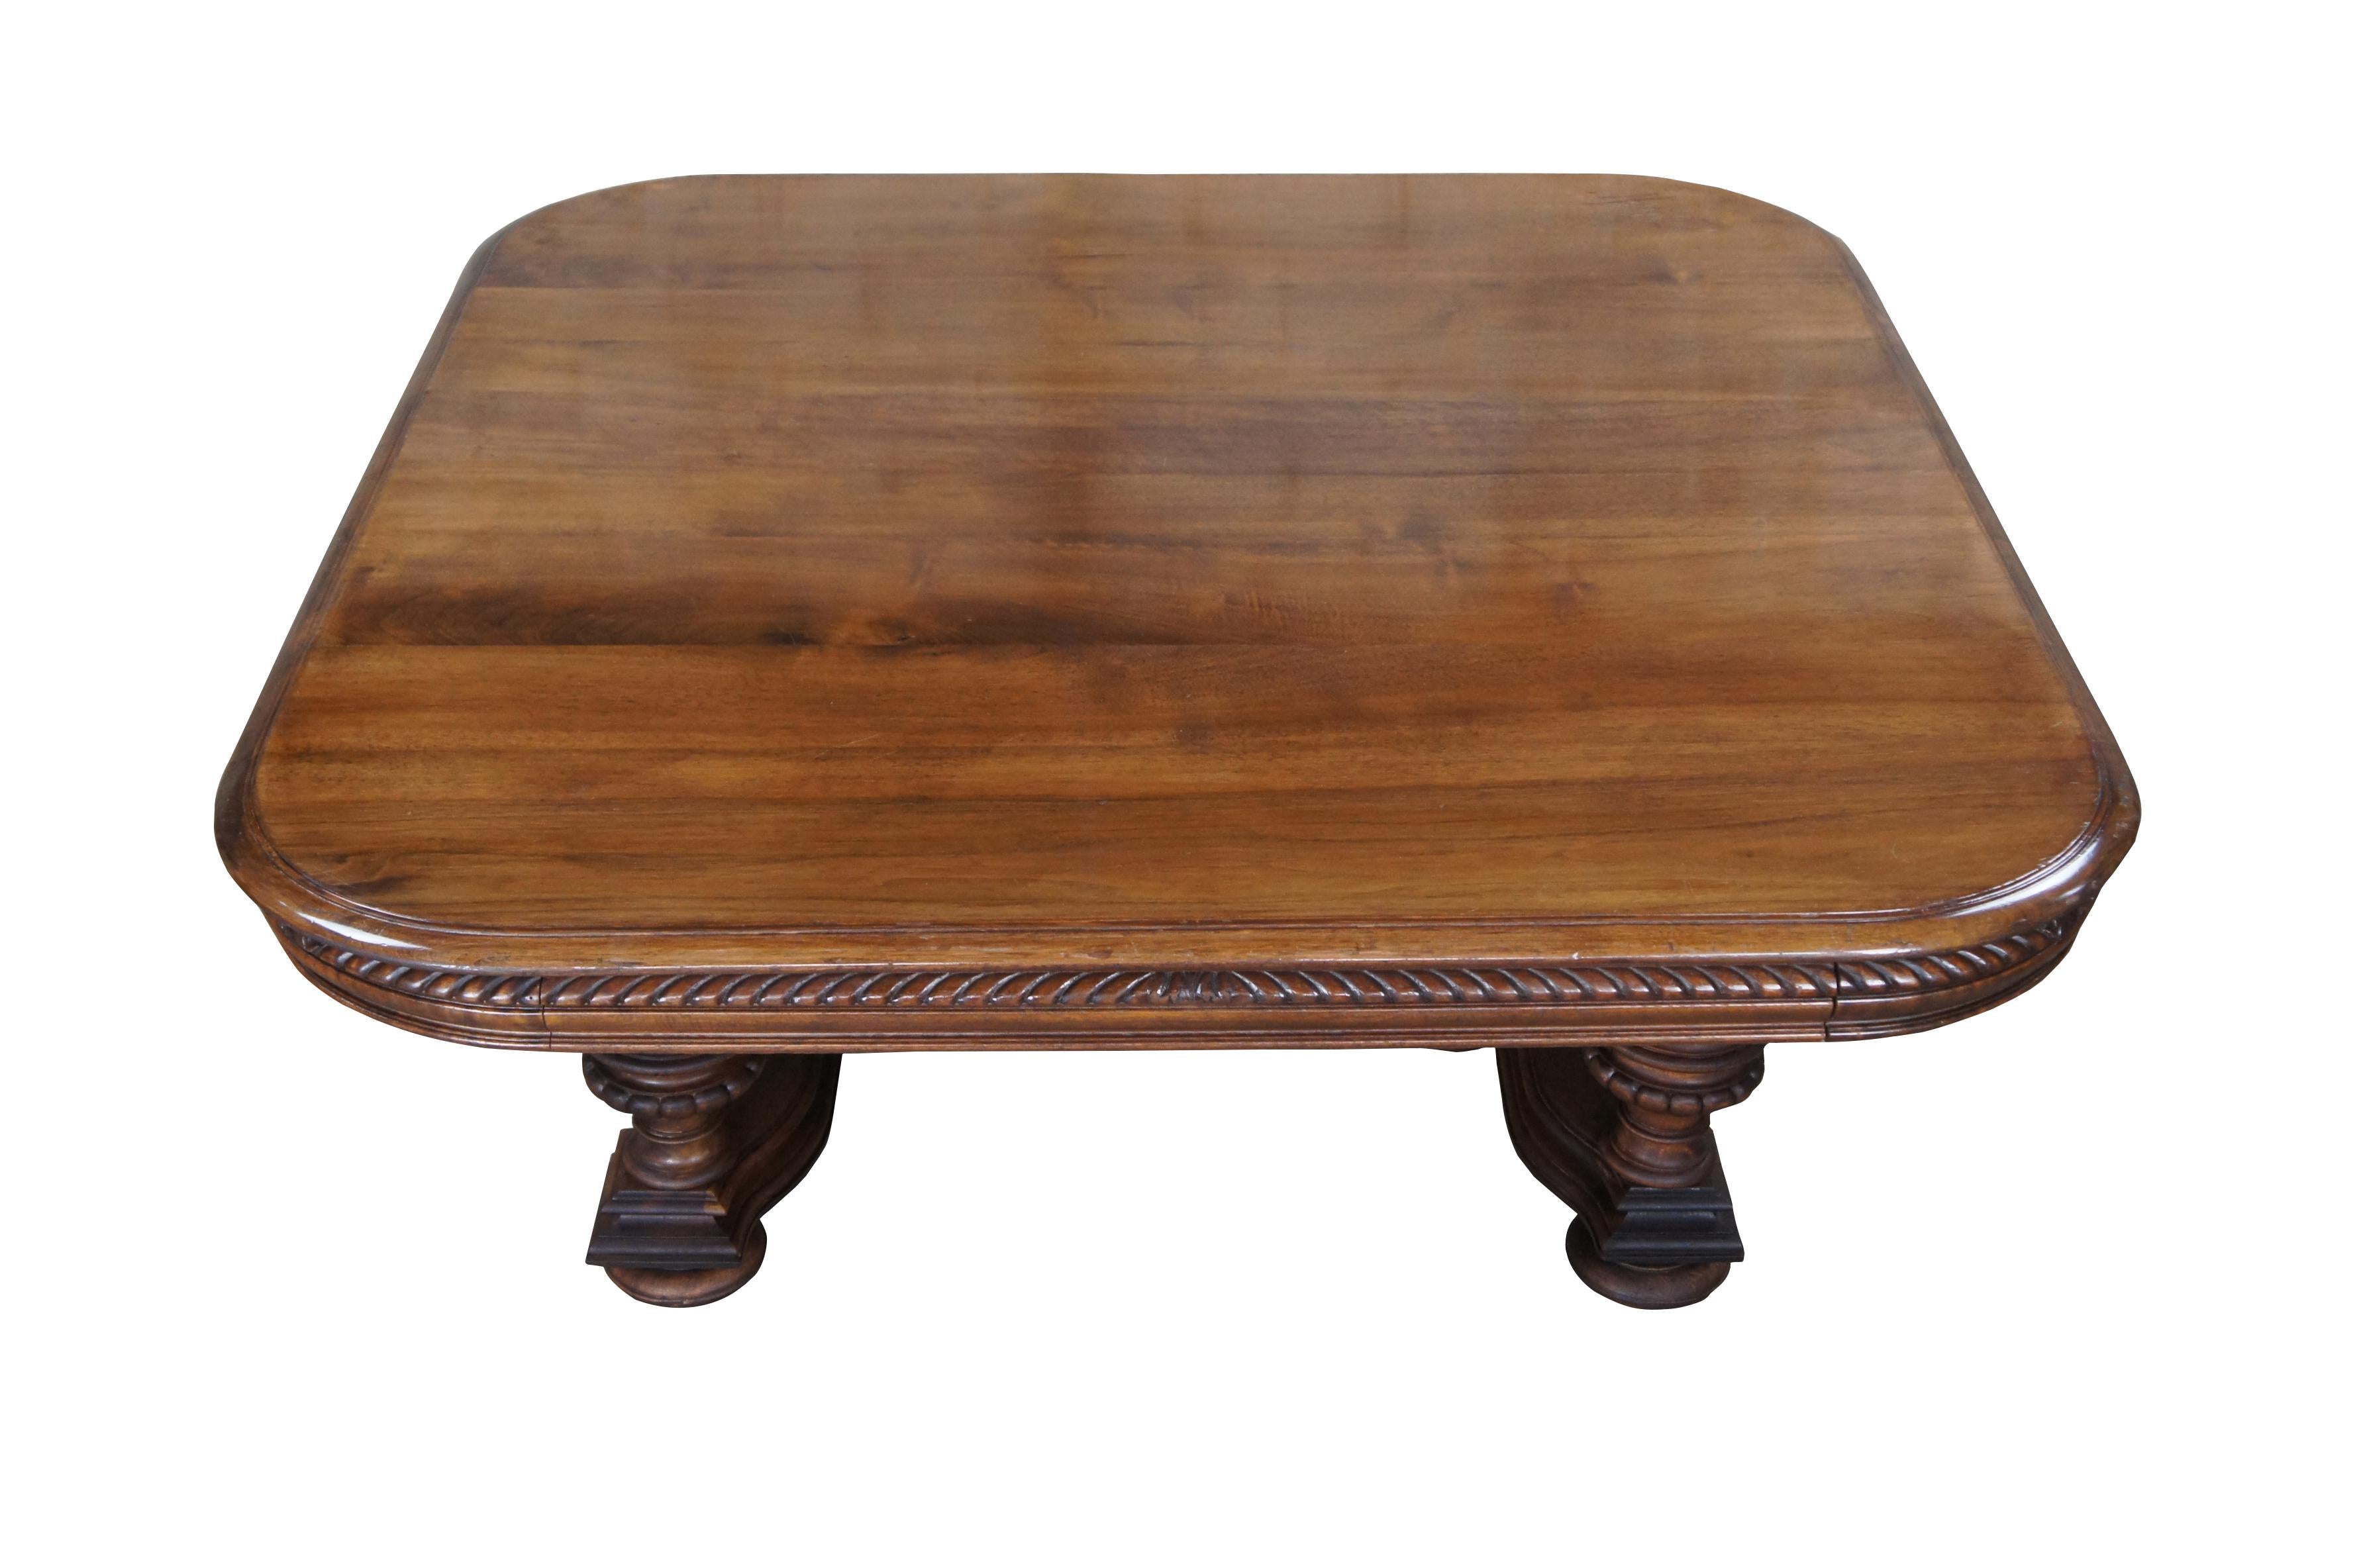 Early 20th Century French coffee table. A rectangular form made from walnut with contoured corners, a gadrooned edge and a unique trestle base consisting of baluster turned and fluted supports, spindled accents and bun feet. This remarkable table